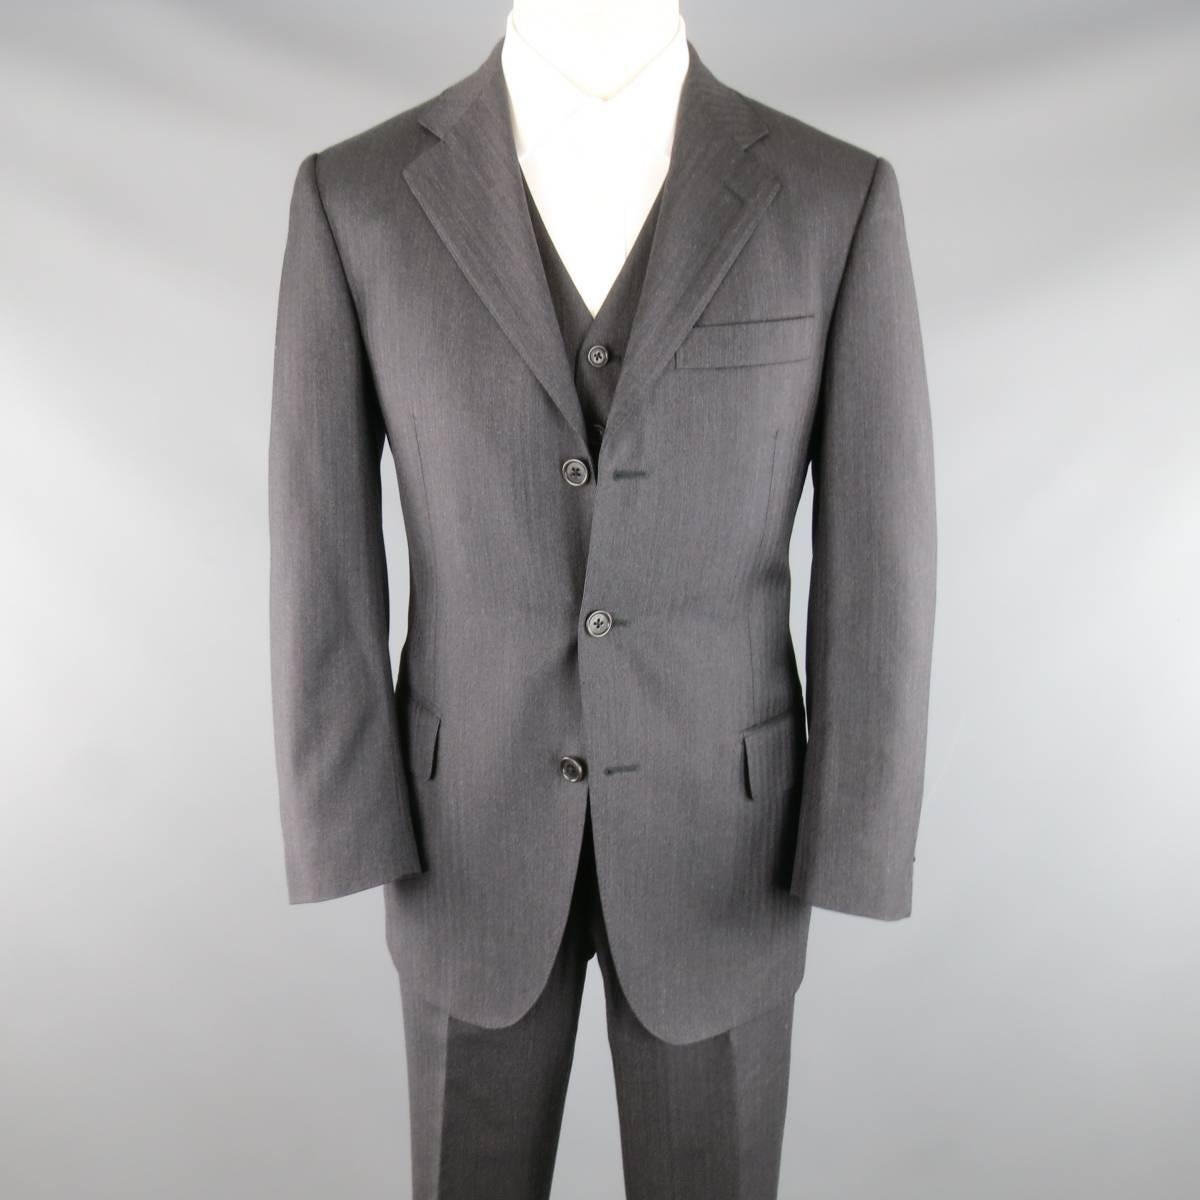 This SALVATORE FERRAGAMO three piece suit comes in a charcoal gray herringbone wool fabric and includes a three button, notch lapel sport coat, V neck vest, and cuffed hem trousers. Made in Italy.
Retails at $2650.00.
 
Excellent Pre-Owned